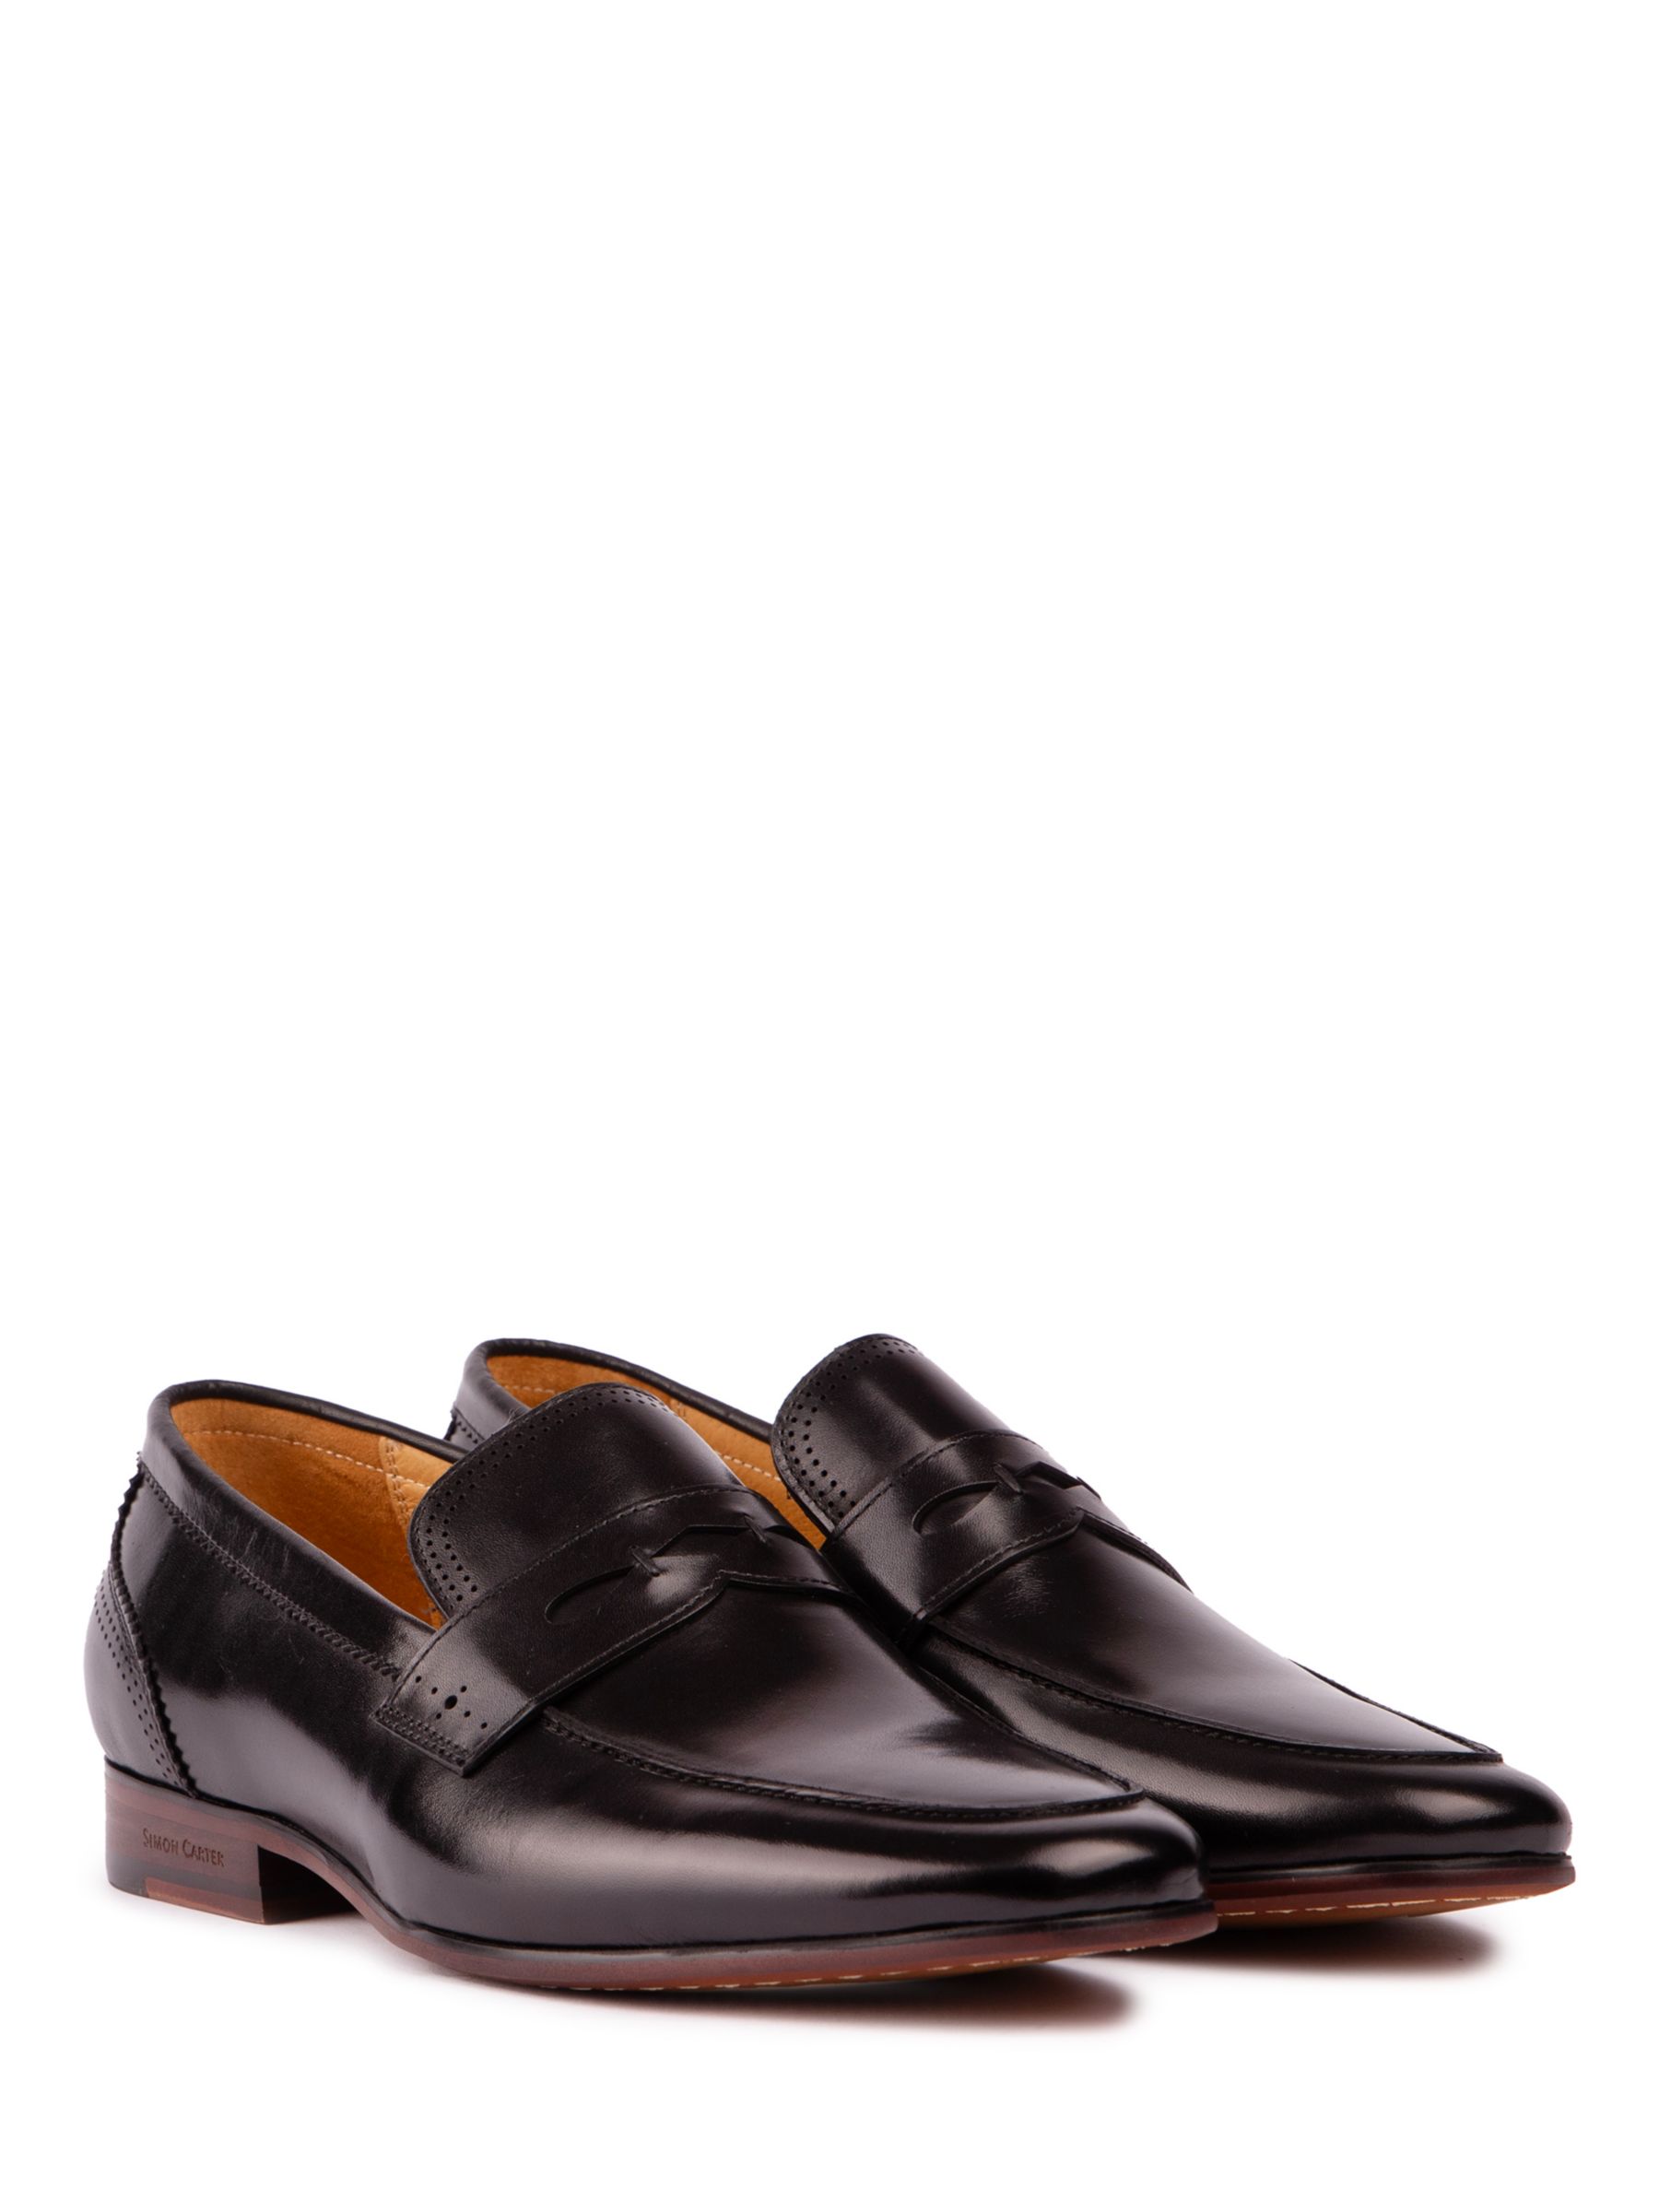 Simon Carter Pike Leather Loafers, Black at John Lewis & Partners